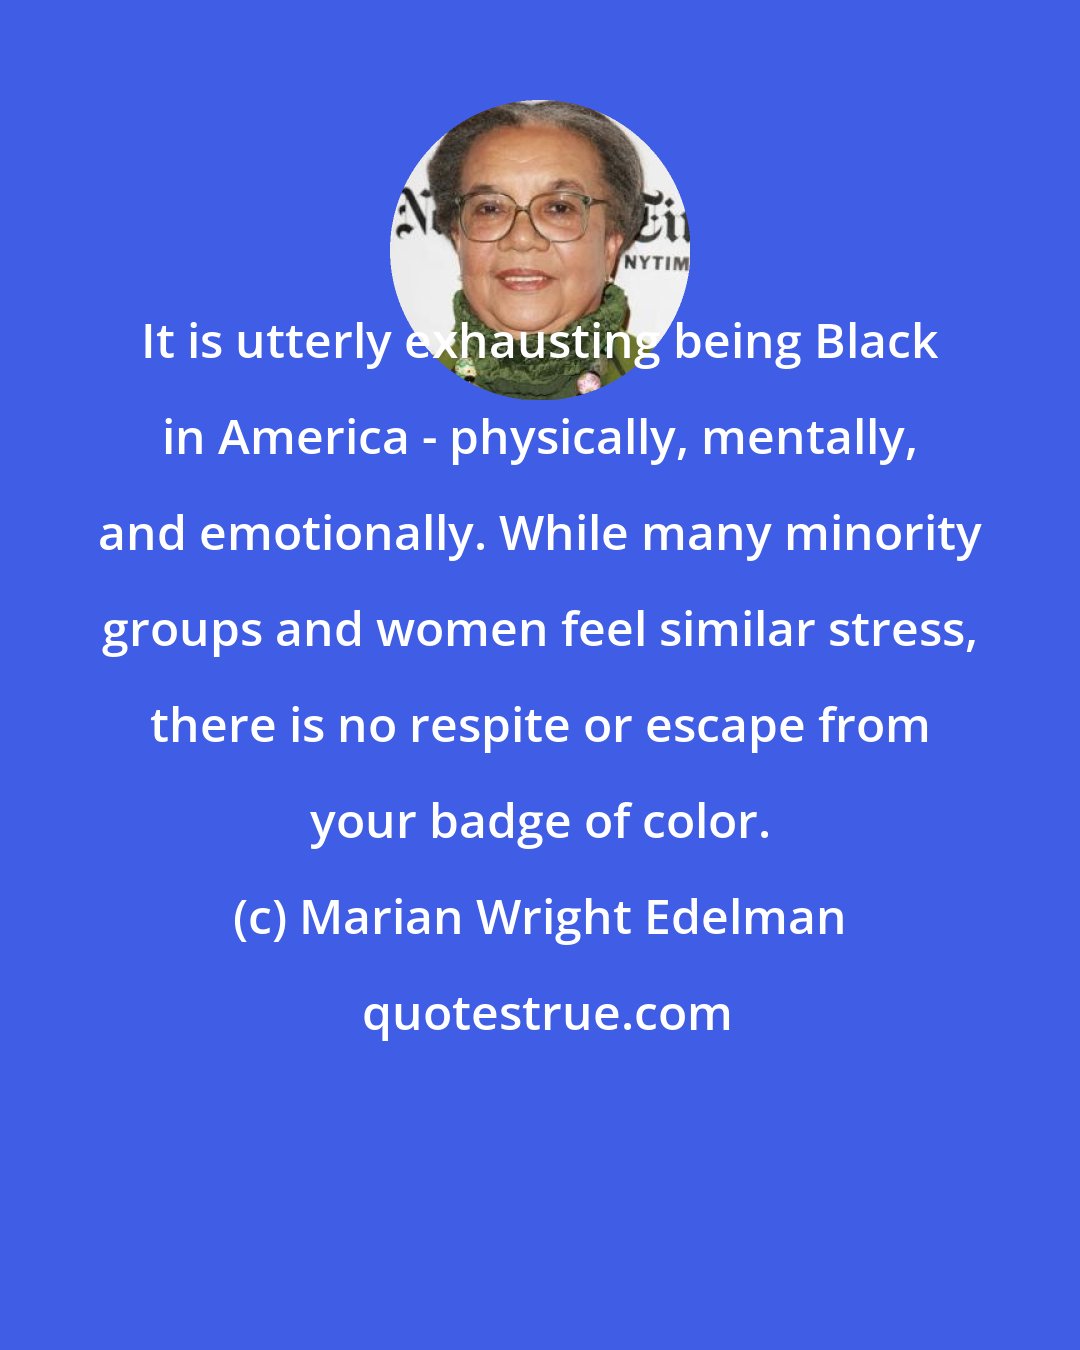 Marian Wright Edelman: It is utterly exhausting being Black in America - physically, mentally, and emotionally. While many minority groups and women feel similar stress, there is no respite or escape from your badge of color.